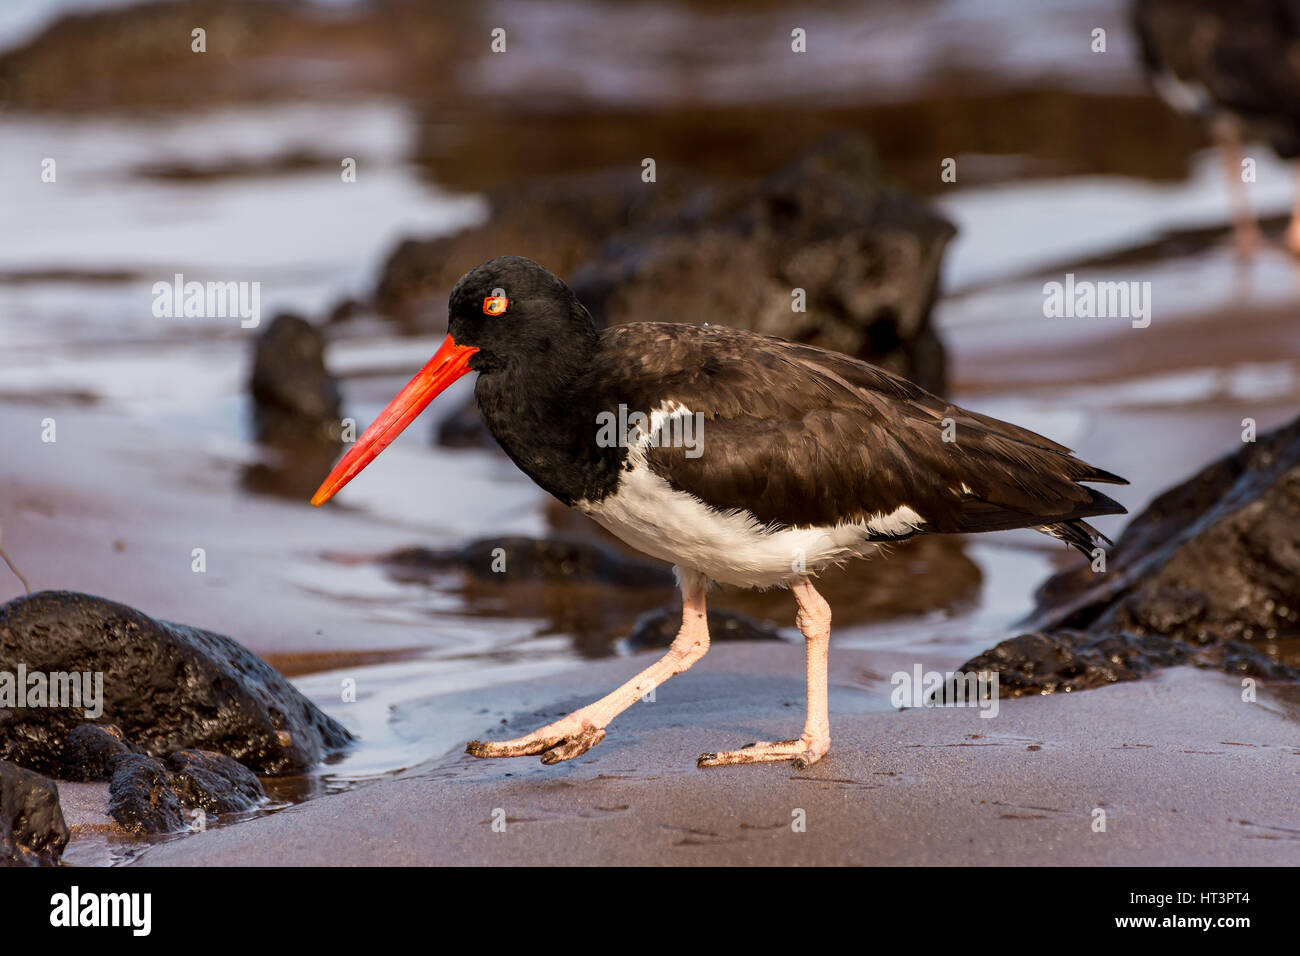 American Oystercatcher searching for food among the lava rock on a beach in the Galapagos Islands. Stock Photo